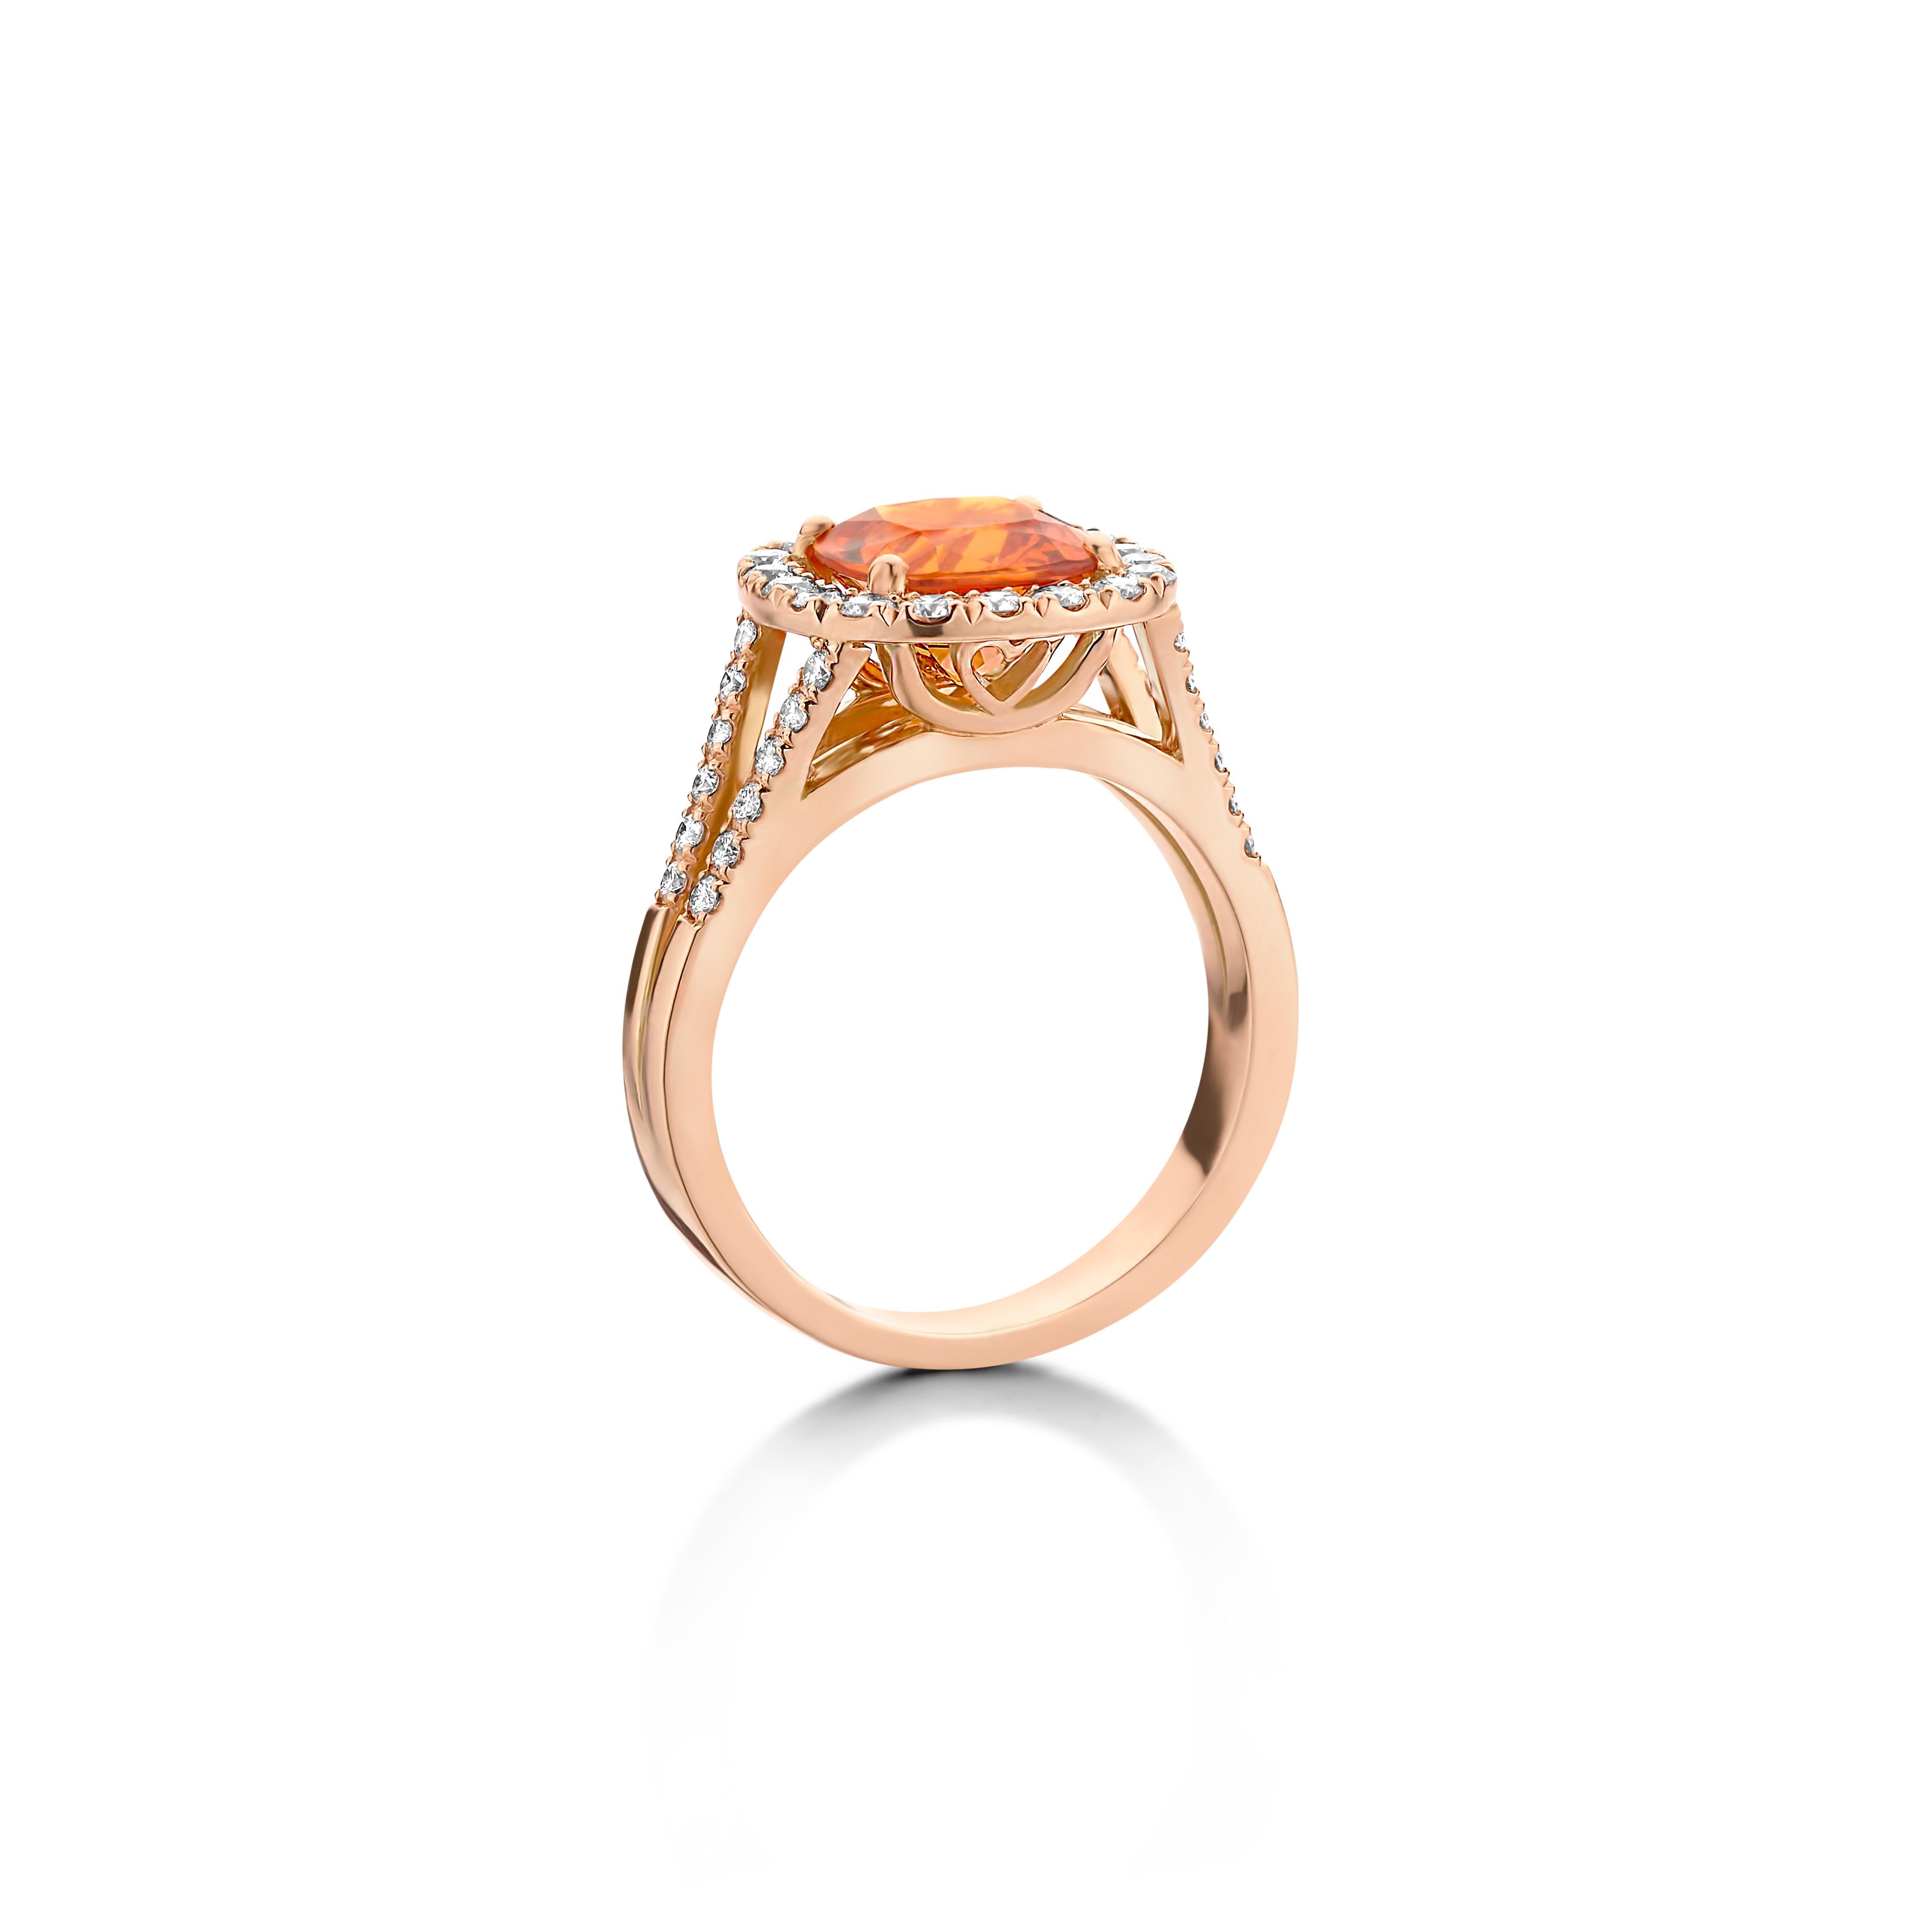 One of a kind “Ella” ring in 18K rose gold 6,2g set with 1 natural, eye clean, mandarin garnet in cushion cut 2.86Ct and the finest diamonds 0.58Ct VS/F quality in brilliant cut. 

Because every garnet has his own color, every piece of the “Ella”